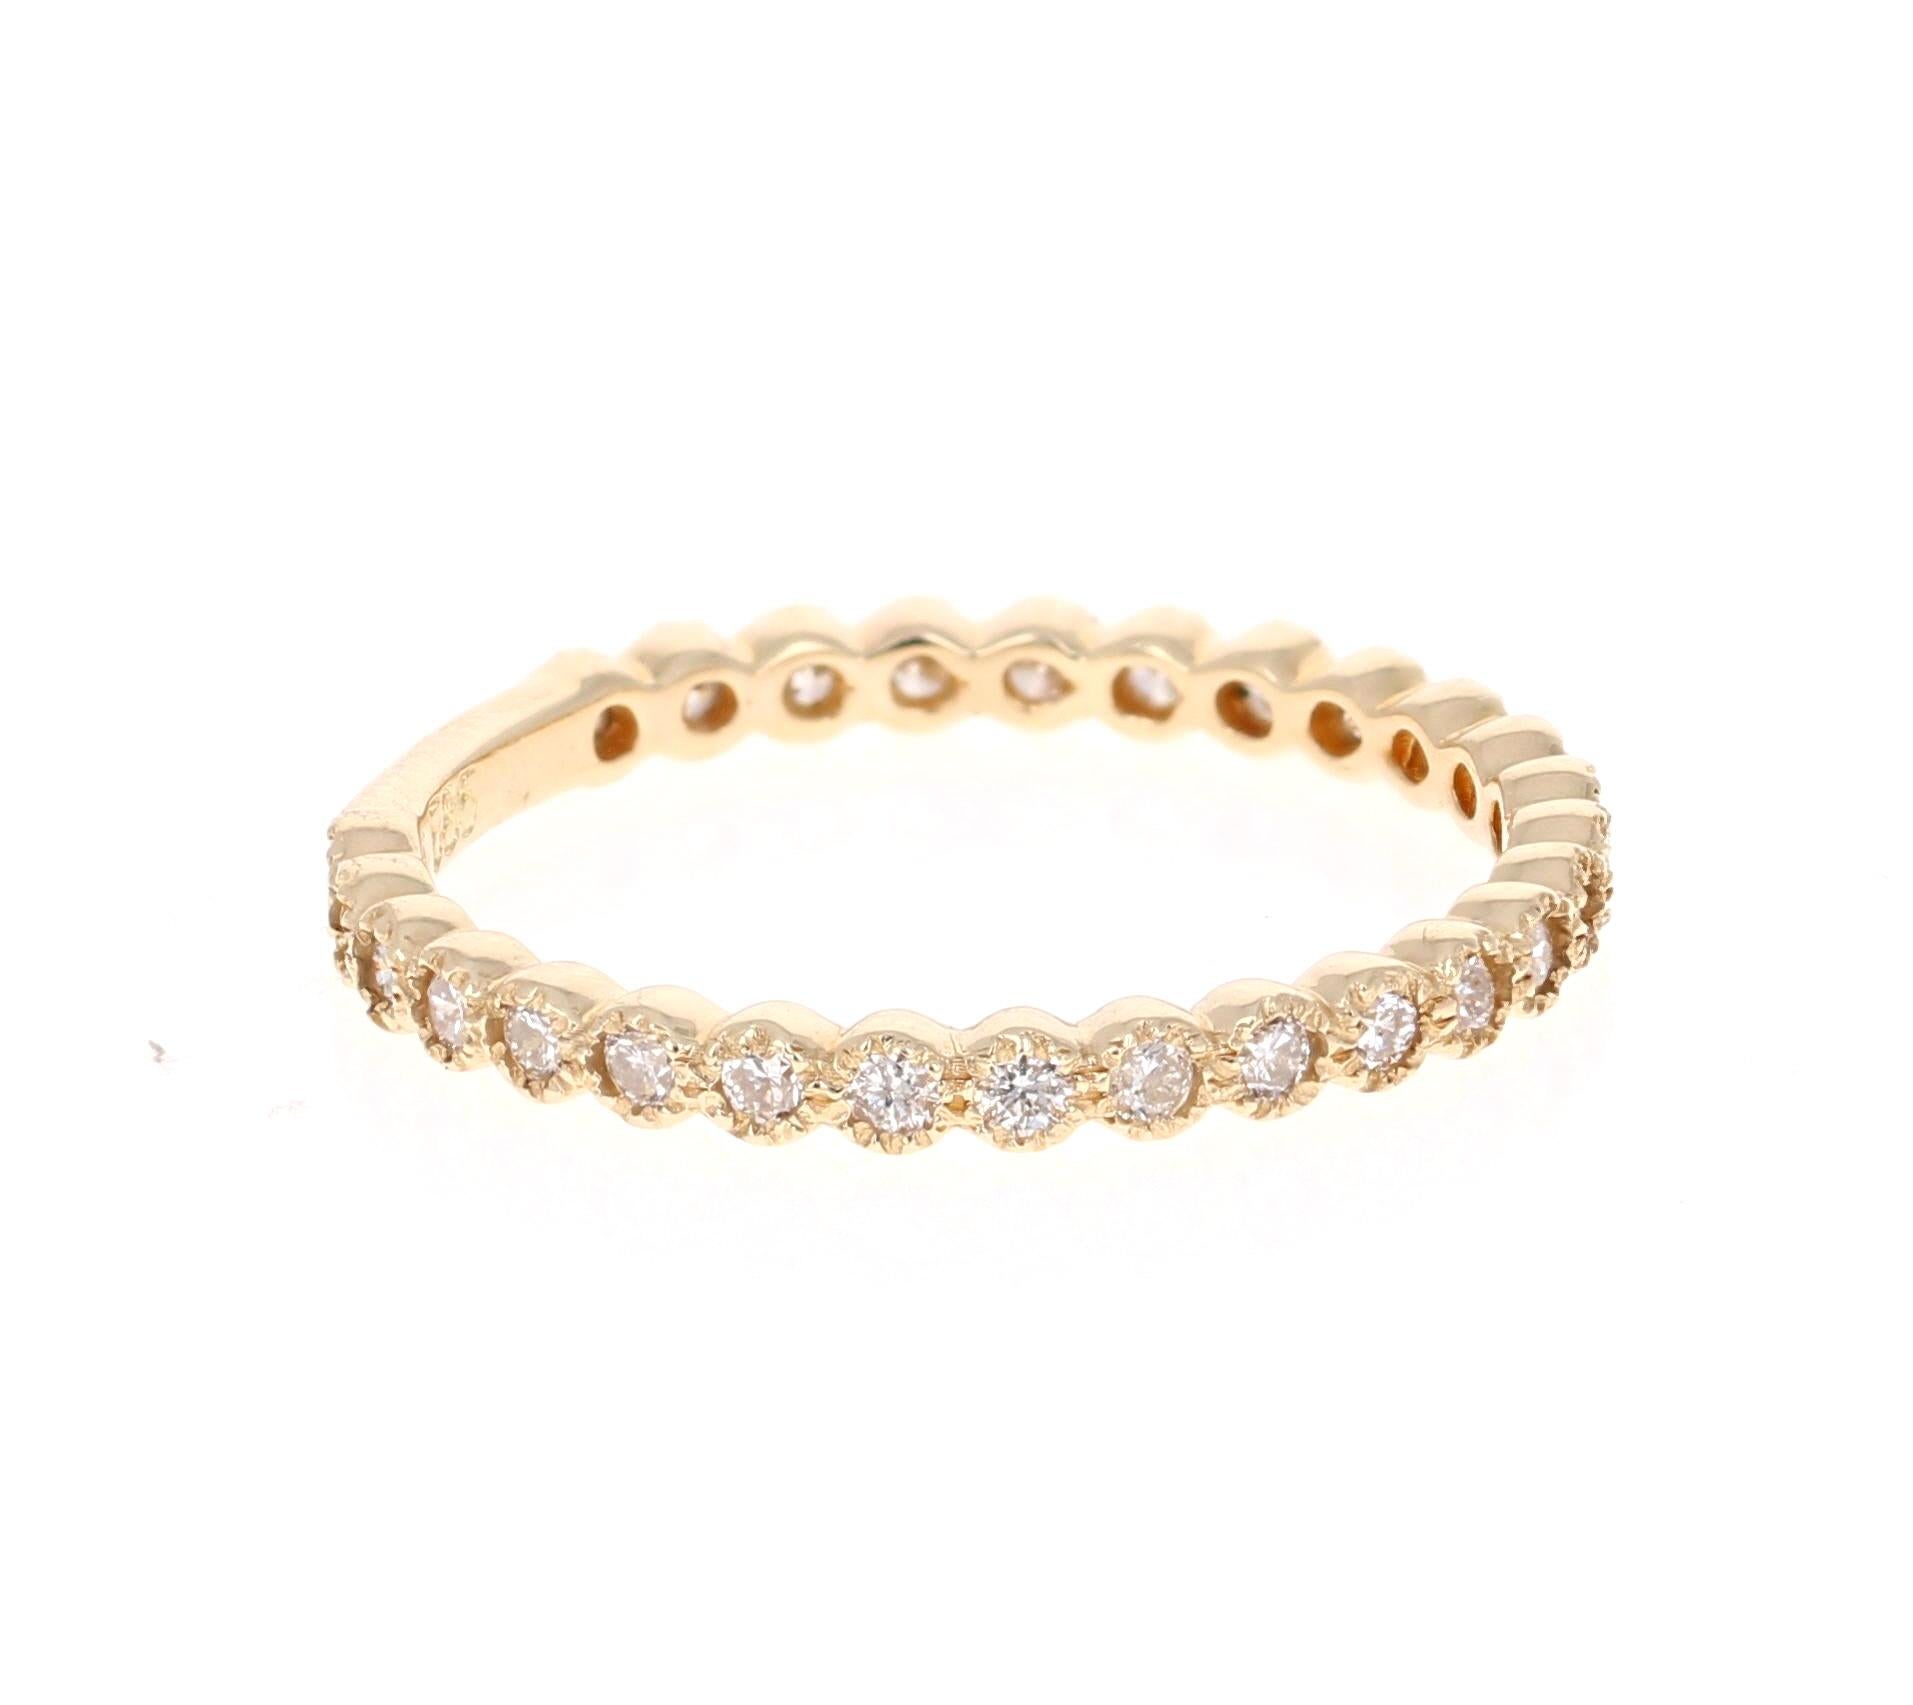 
This ring has 27 Round Cut Diamonds that weigh 0.40 Carats. The clarity and color of the diamonds are VS-H.

Crafted in 14 Karat Yellow Gold and is approximately 1.5 grams 

The ring is a size 6.5 and can be re-sized at no additional charge!